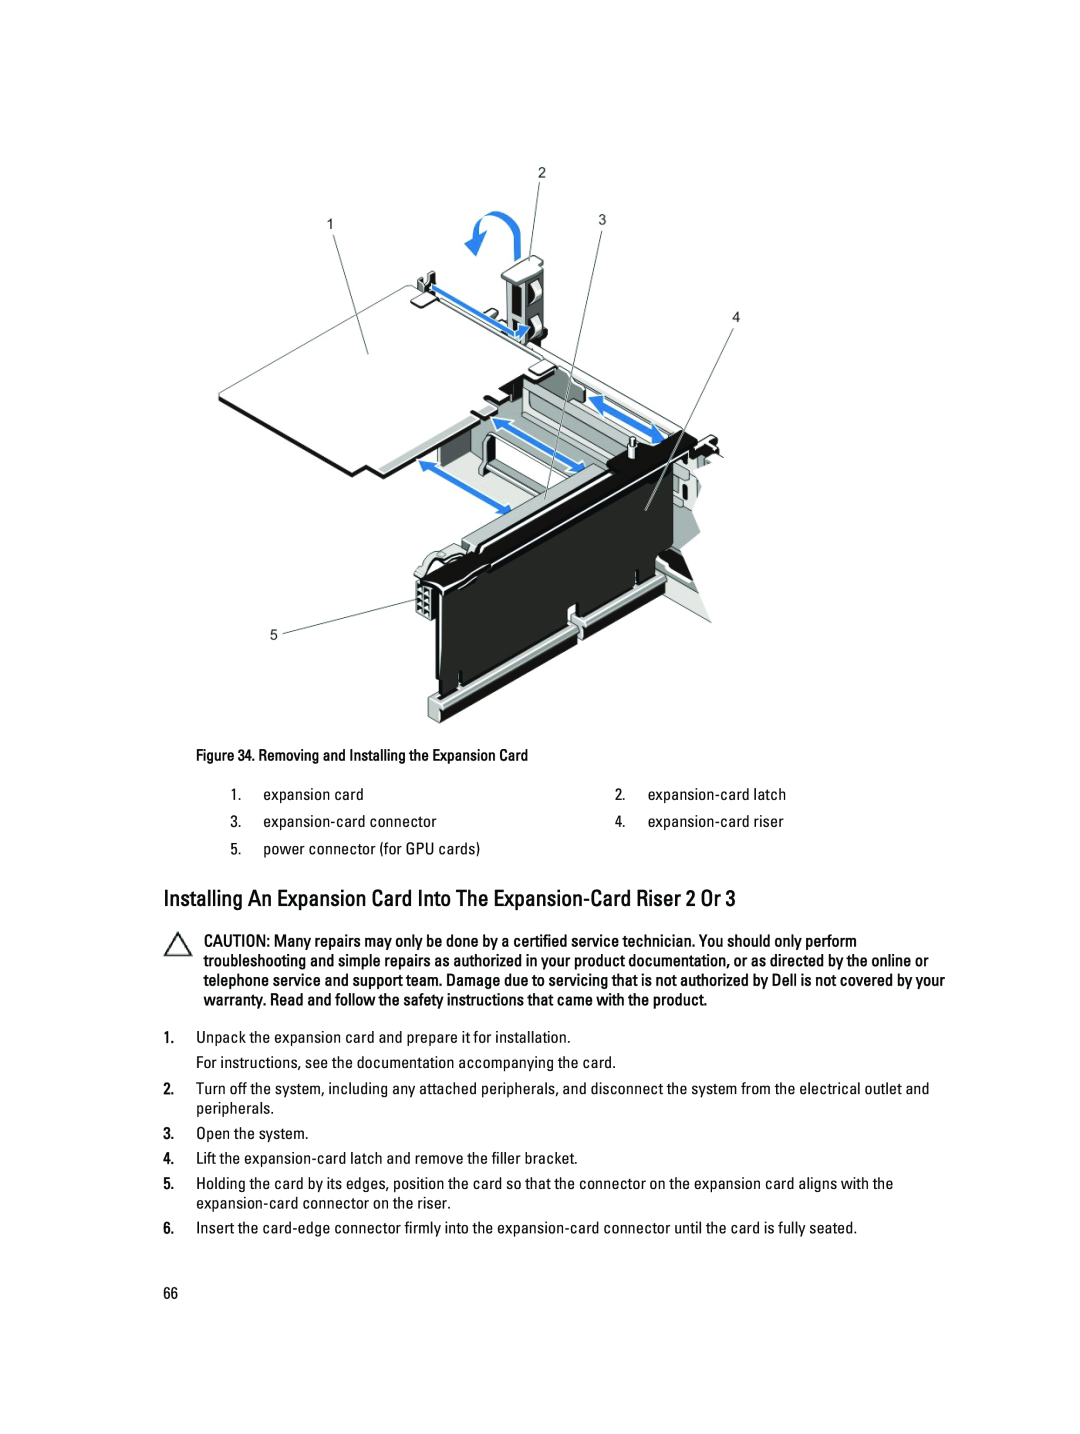 Dell R720XD owner manual expansion card 